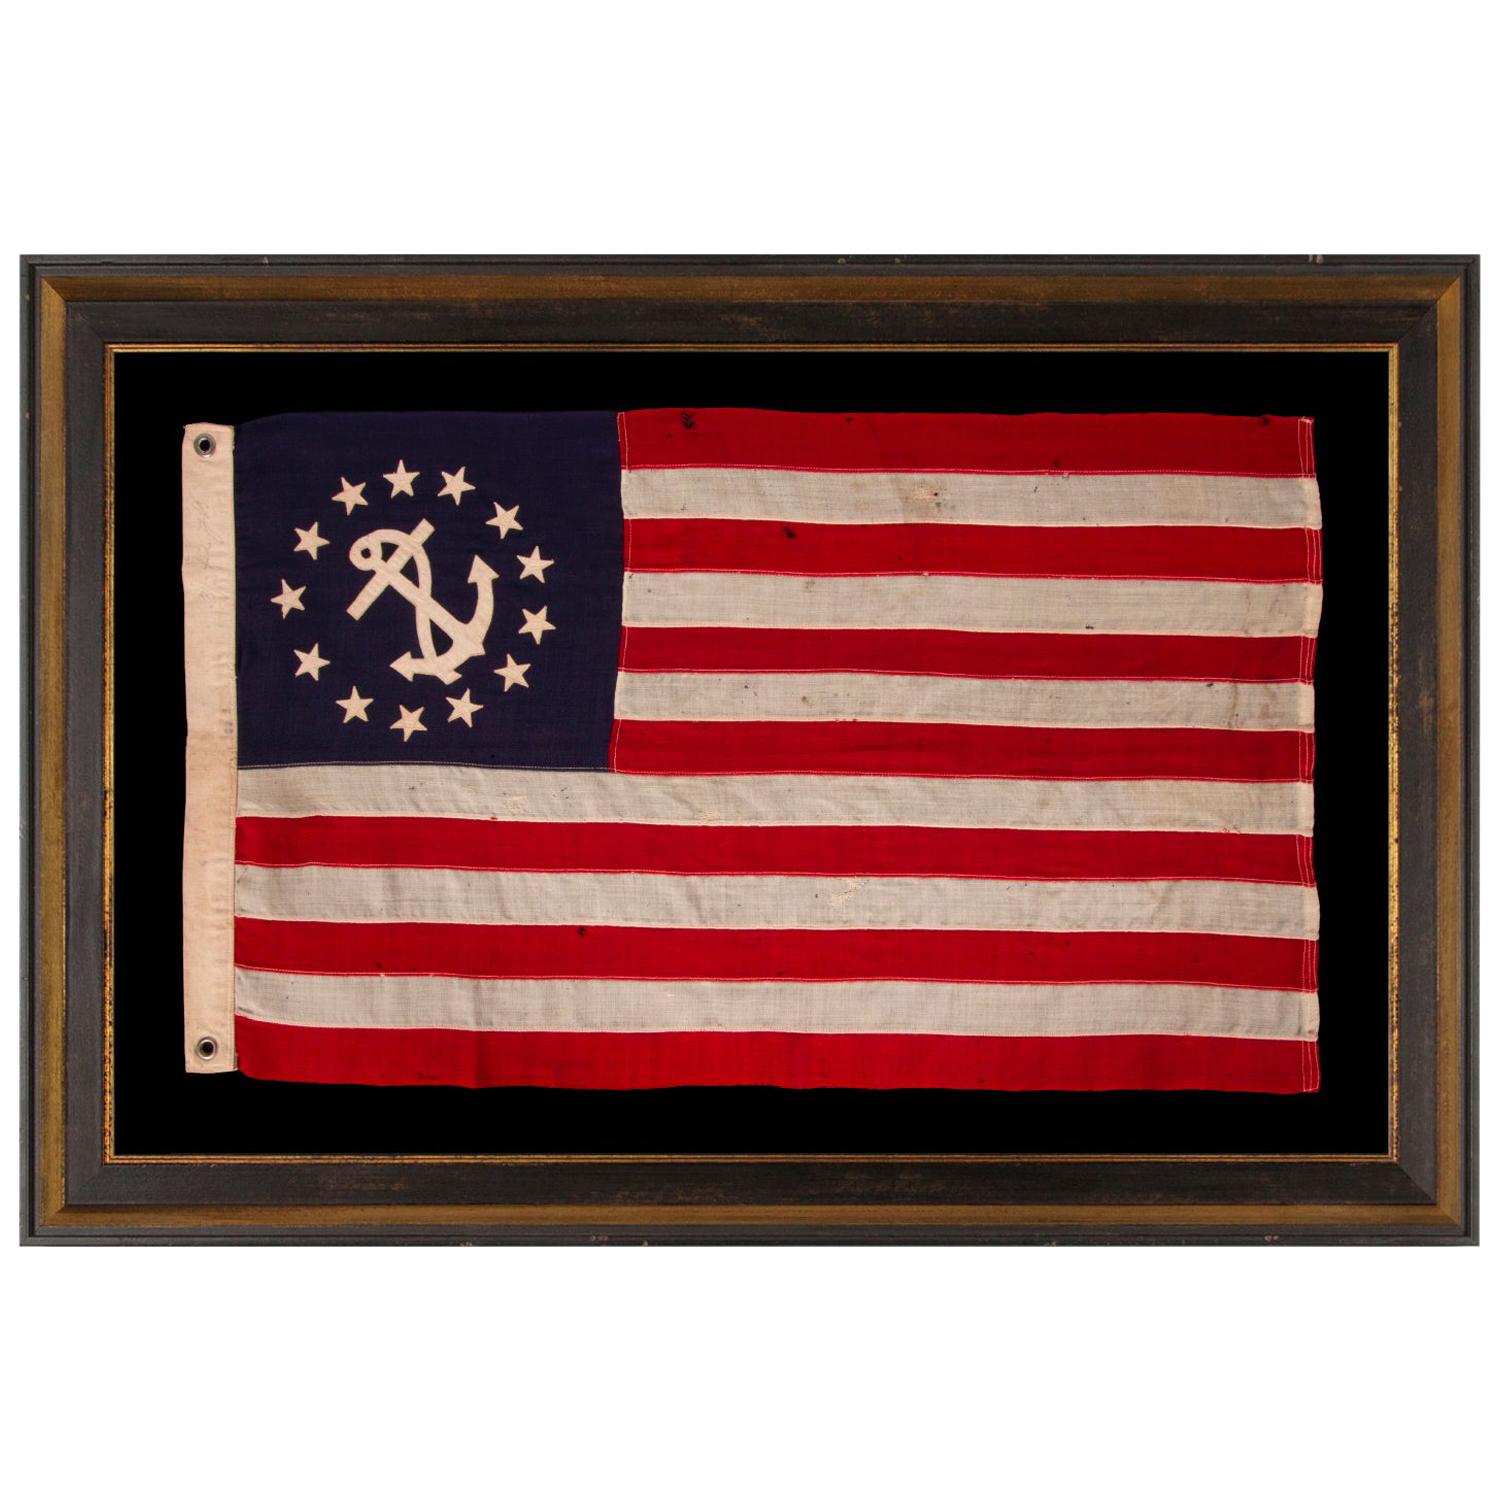 13 Star Private Yacht Flag 'Ensign' Surrounding a Canted Anchor, circa 1905-1920